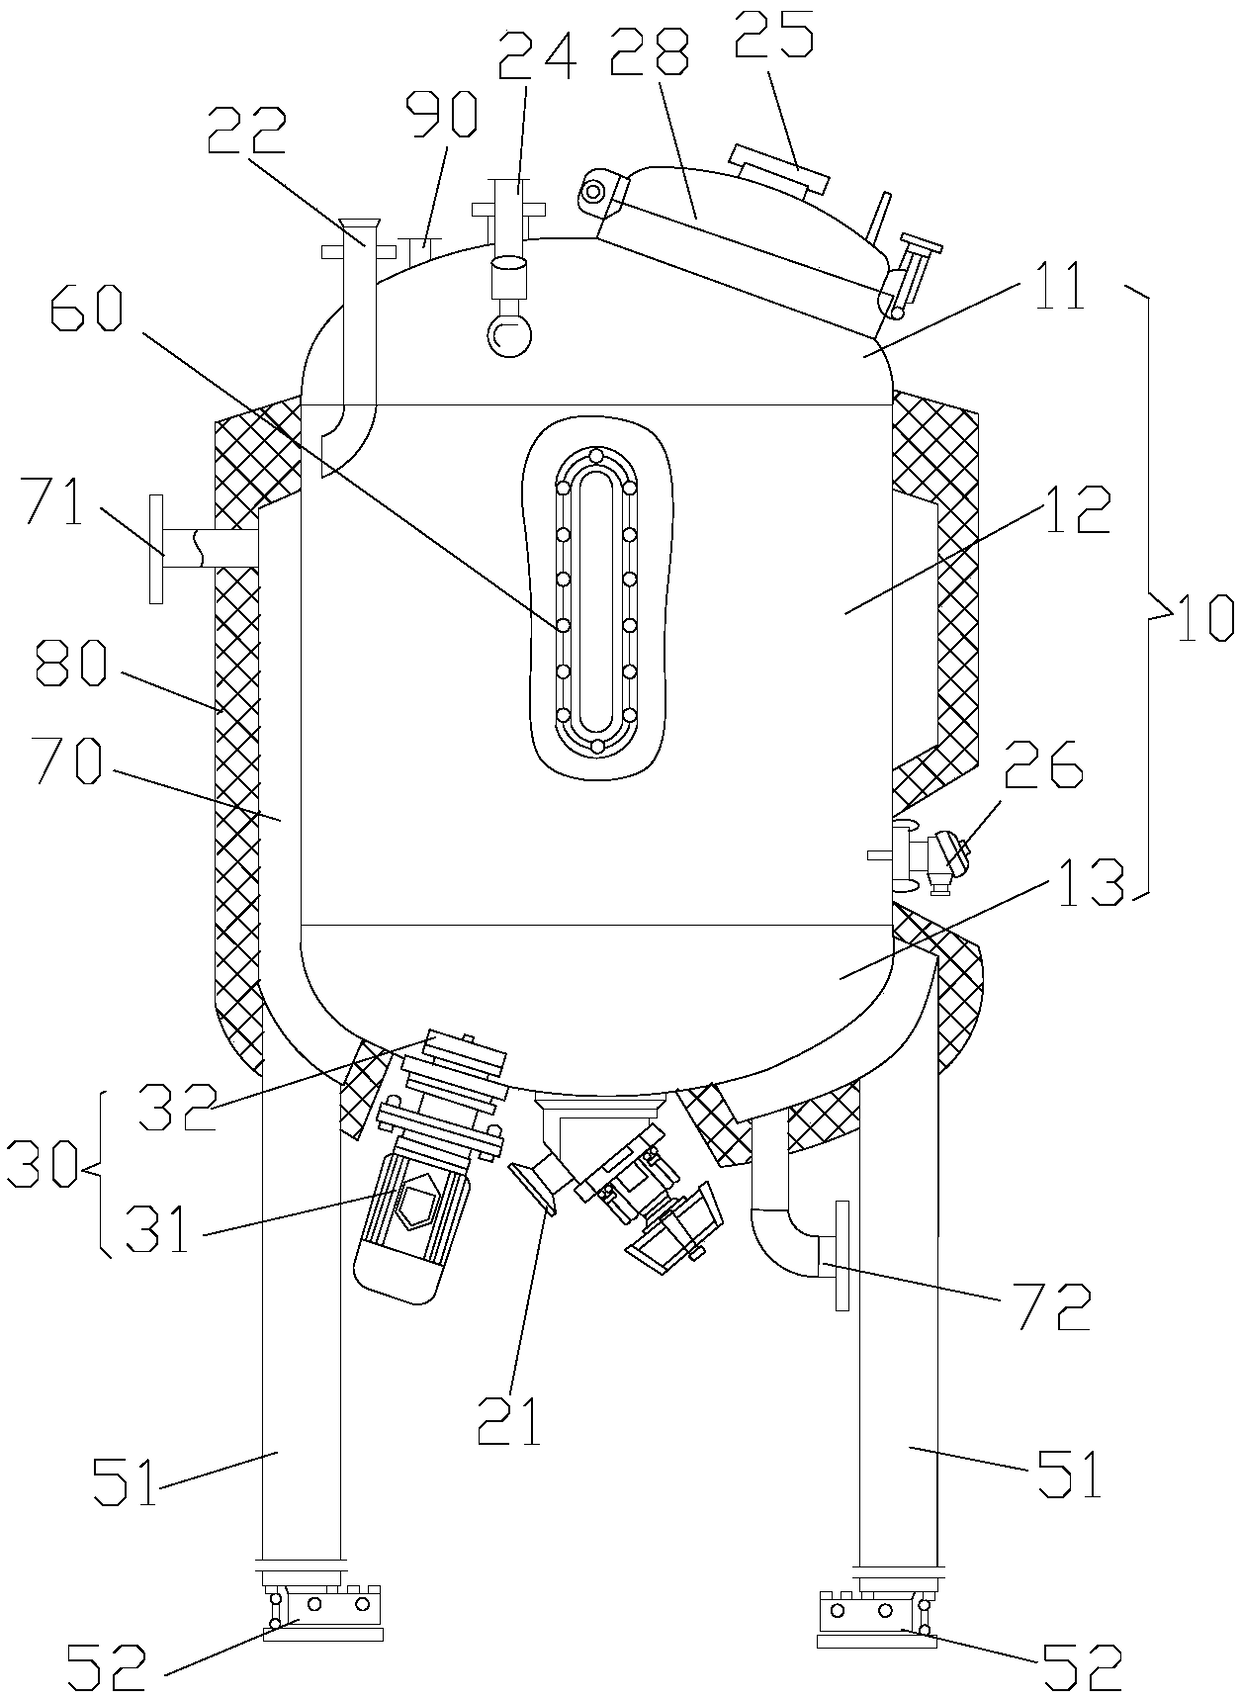 Water phase tank device